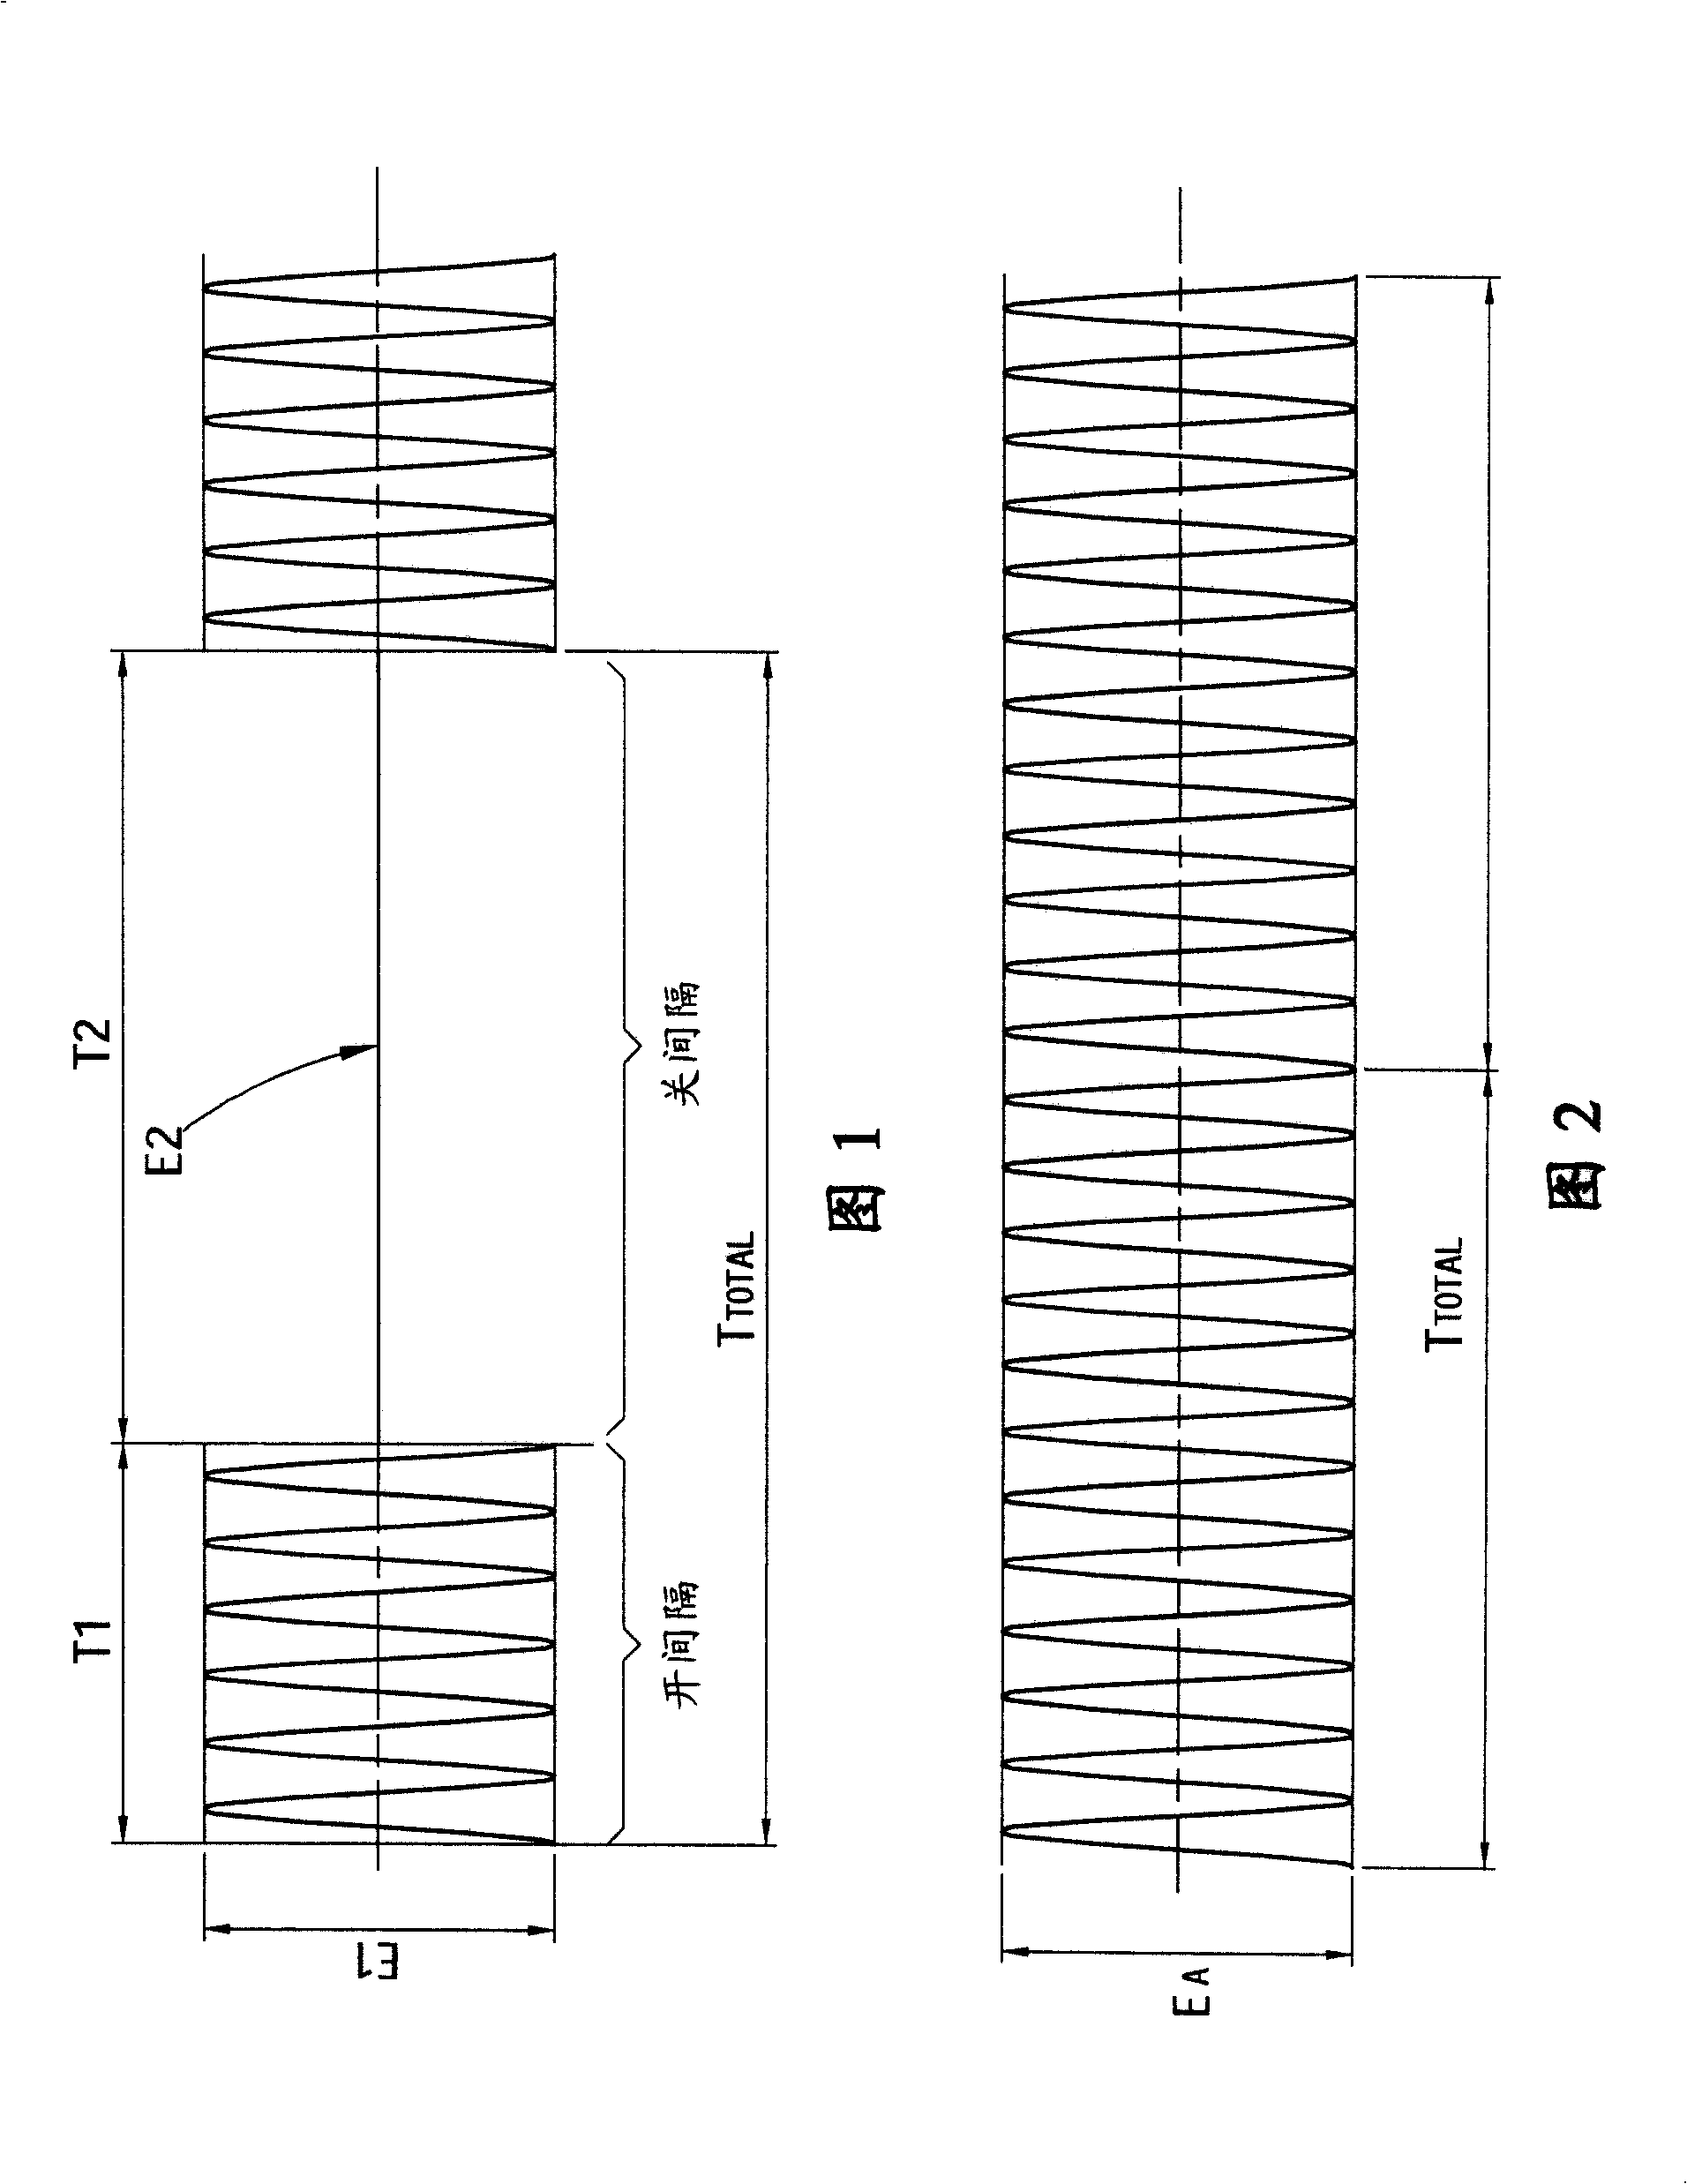 Multiple changing mode power control method